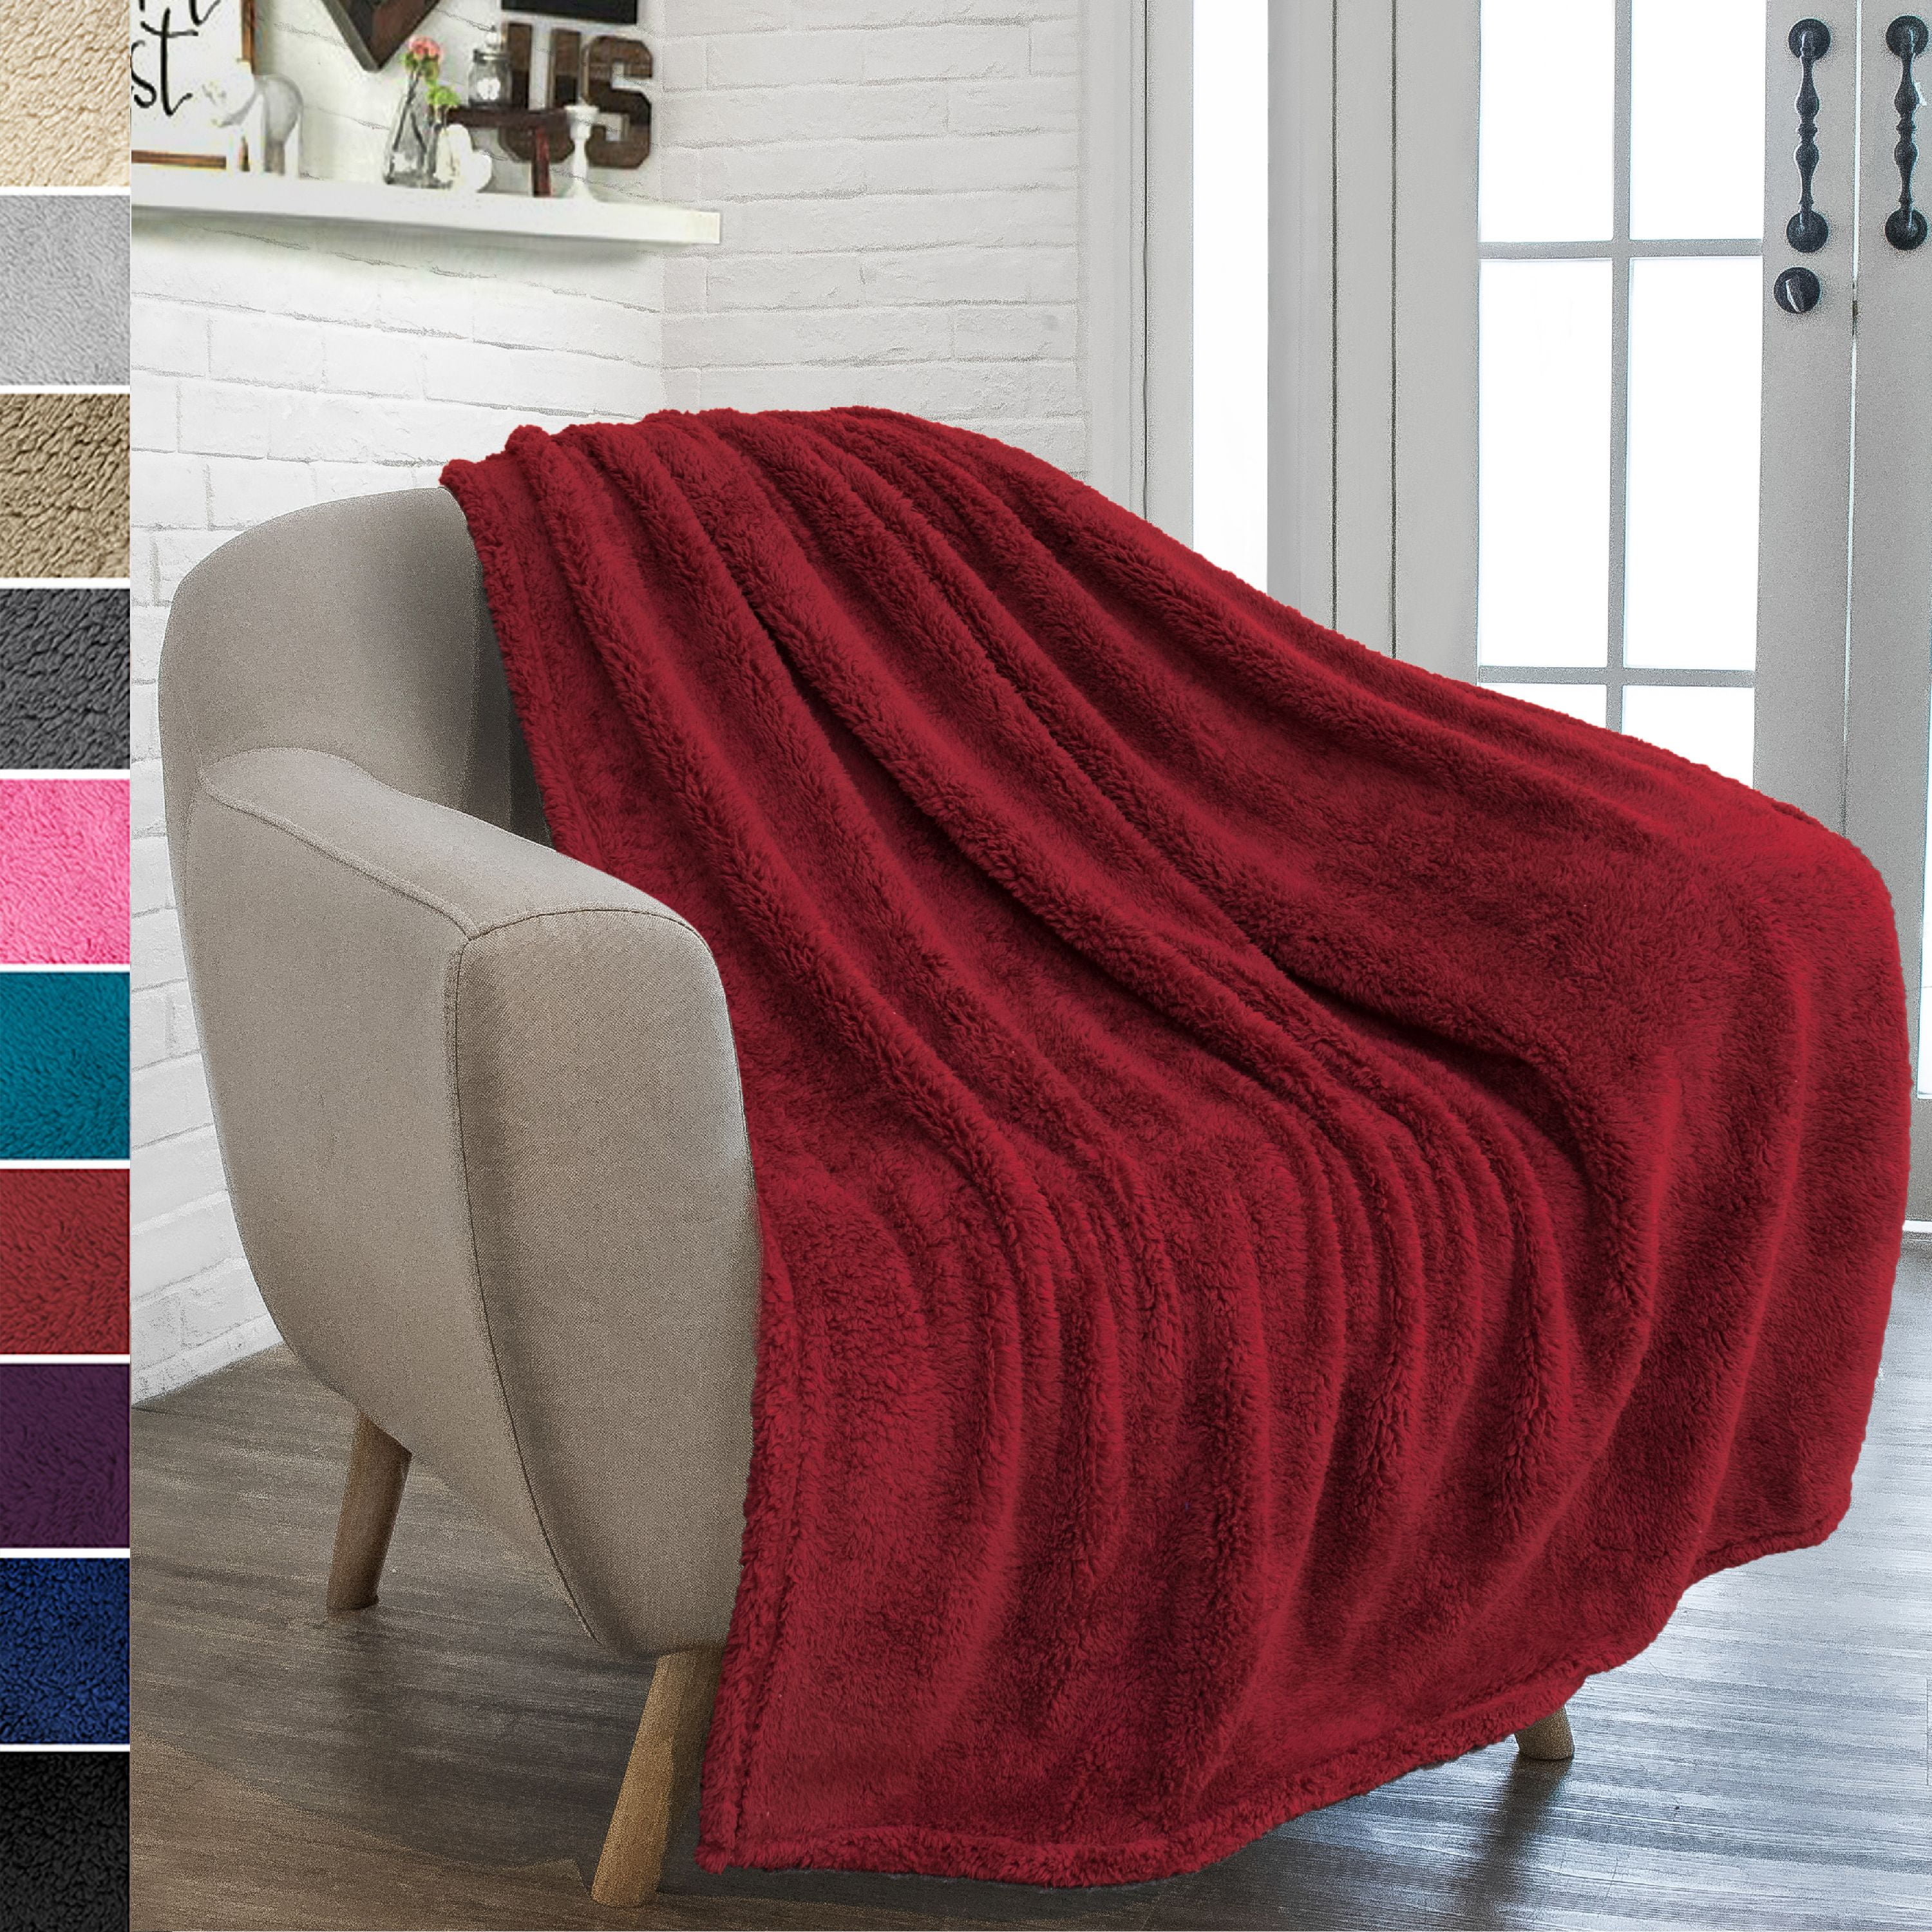 Travelling Couch Plaid Throw Blanket 50 x 60 Inch Decorative Classic Blanket – Comfortable and Ultra-Soft – Ideal for Living Room 50x60, Red Multi 